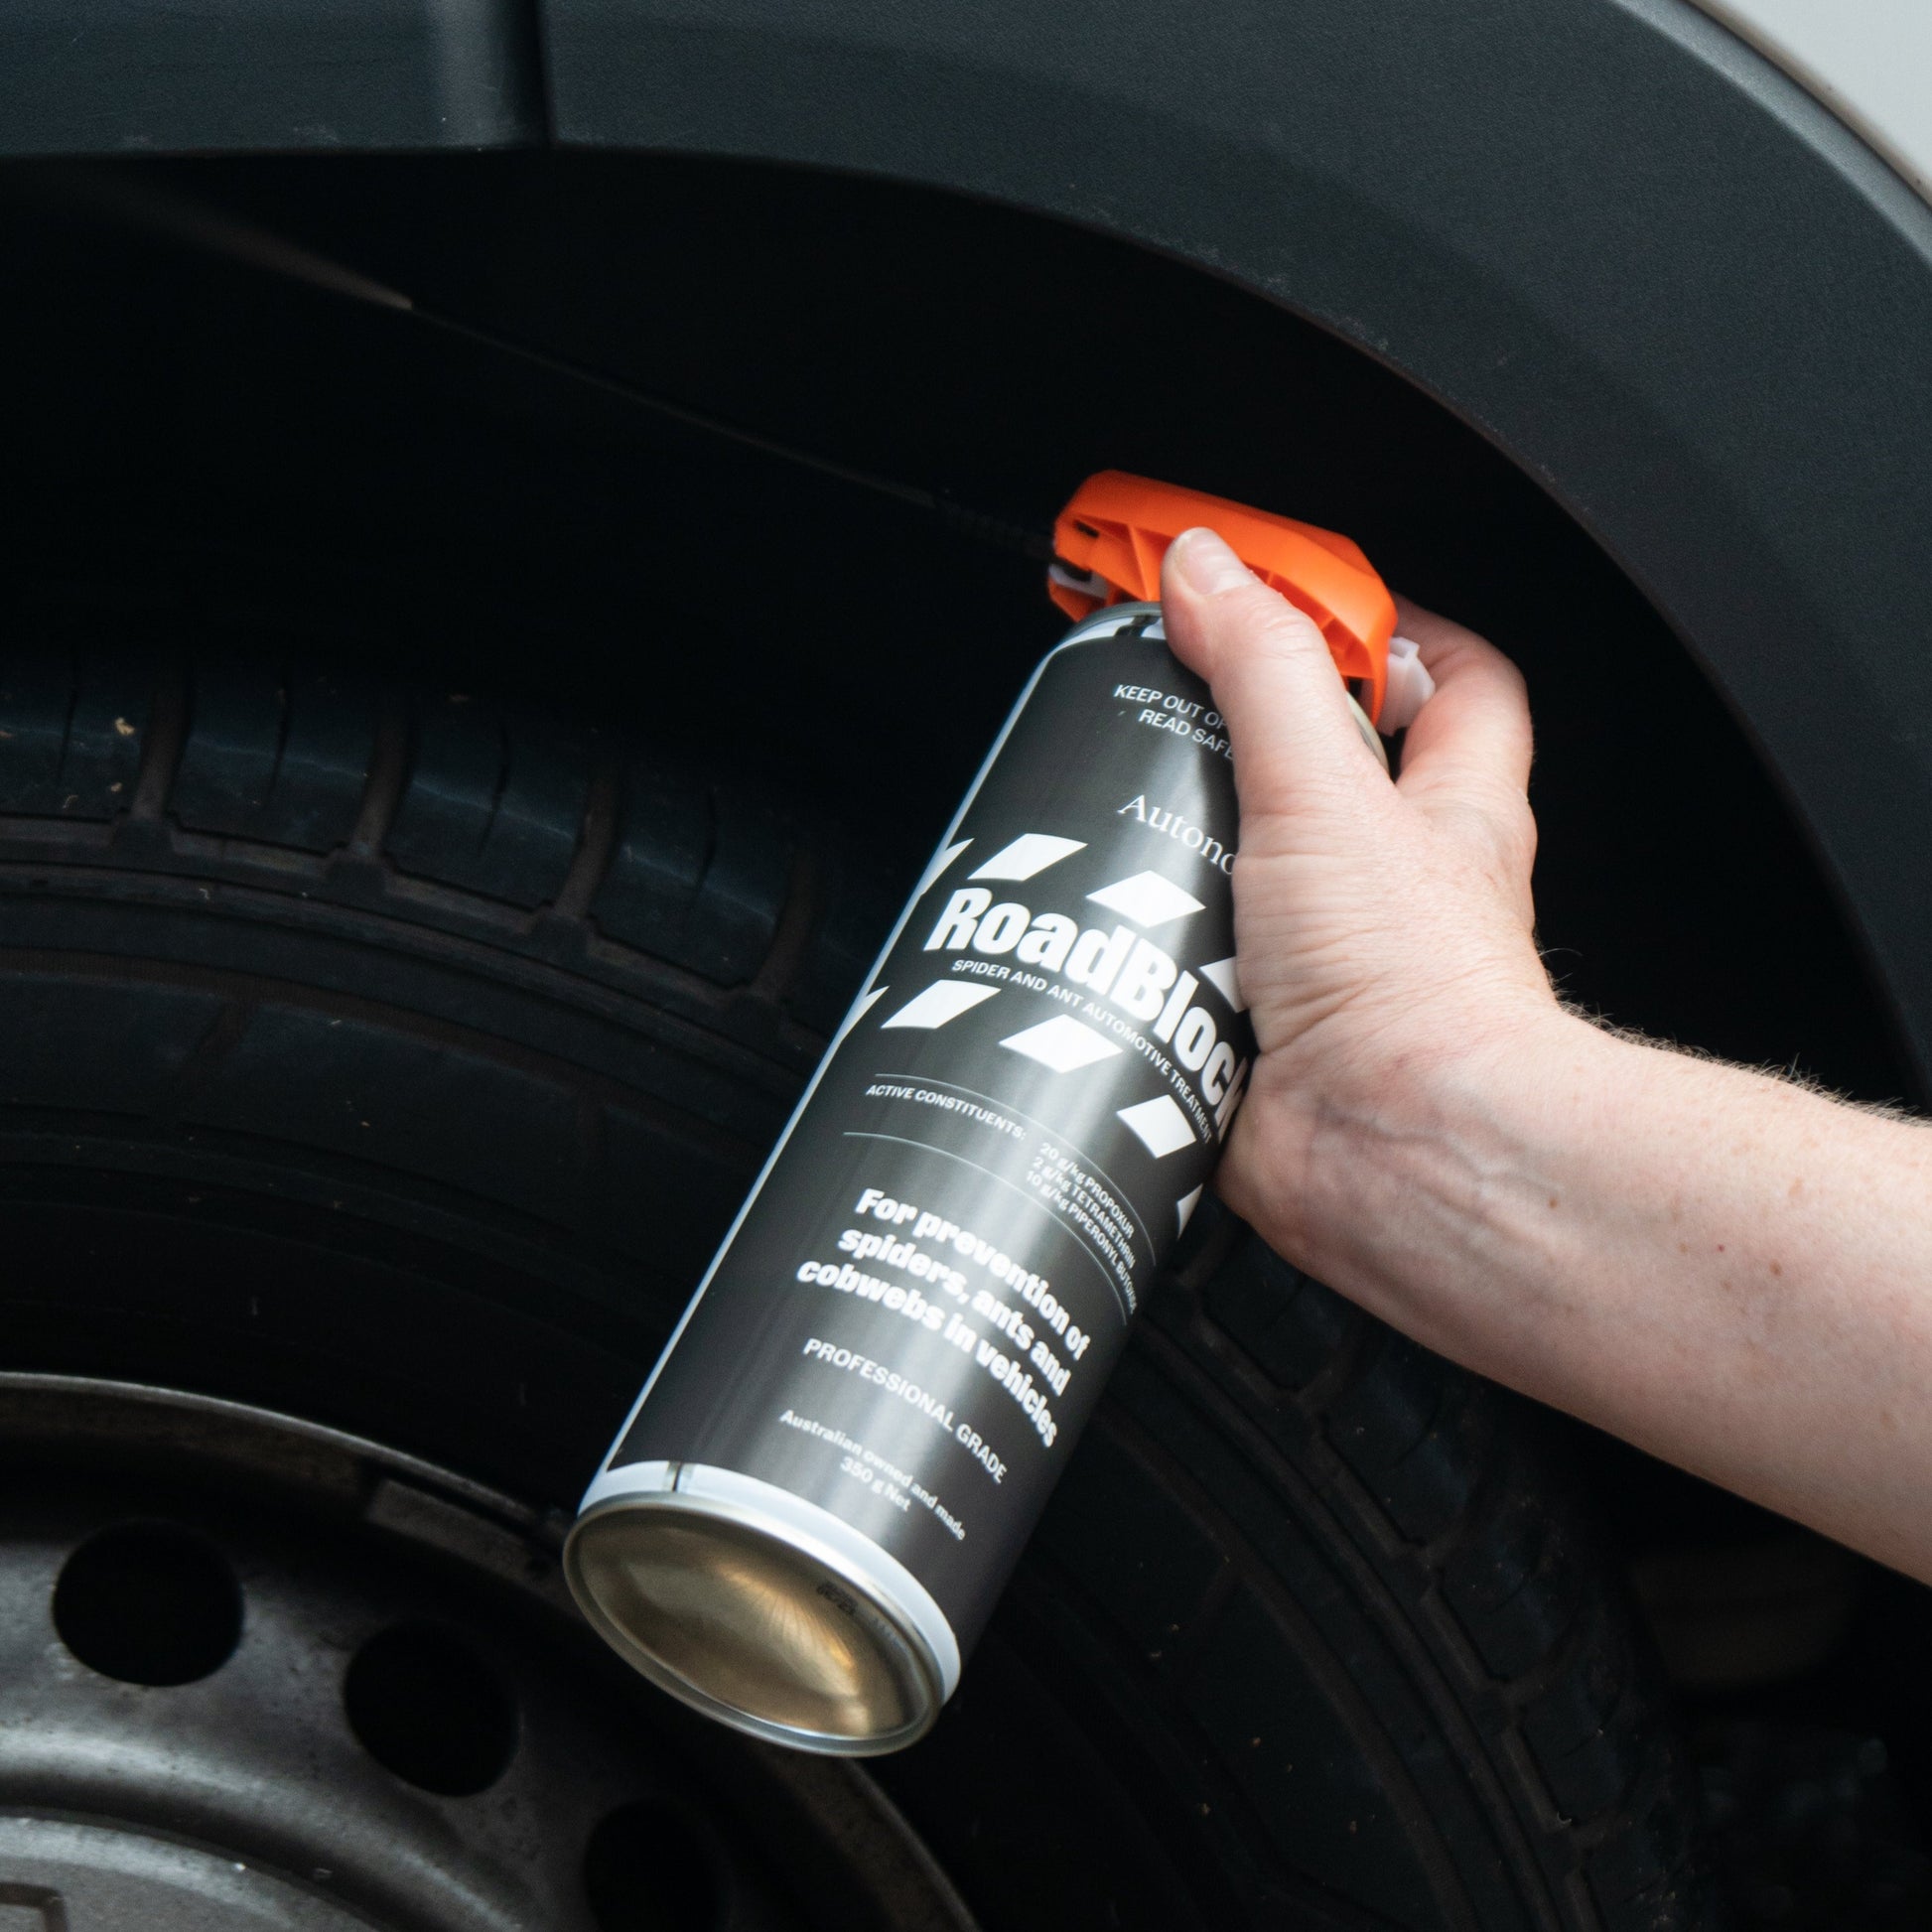 Treat and prevent spiders and ants in cars and vans with RoadBlock. Spray on wheel arches and other major entry points